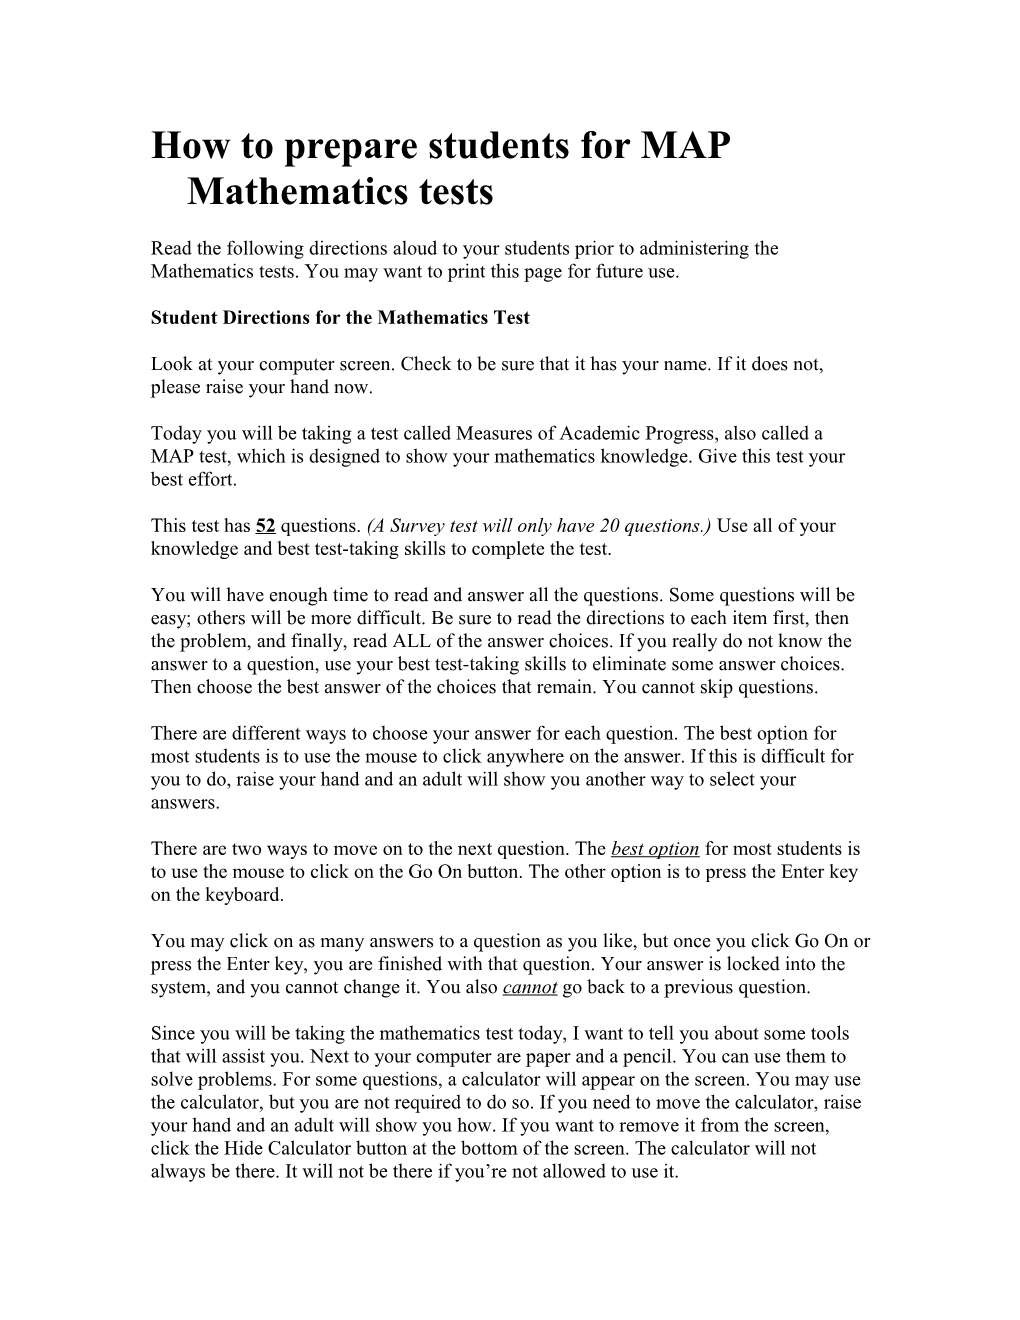 How to Prepare Students for MAP Mathematics Tests